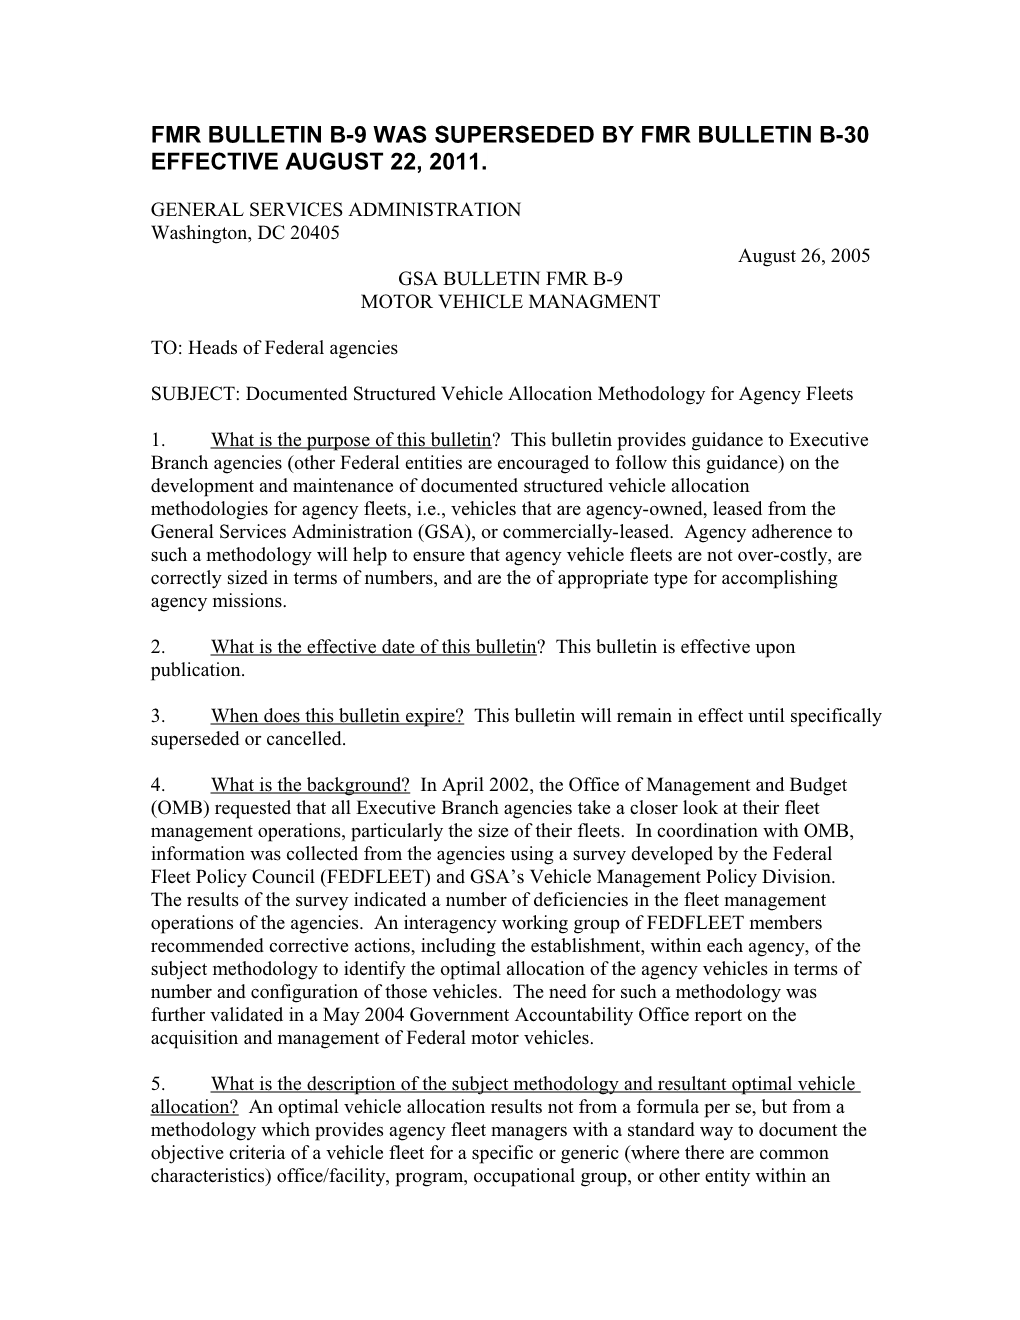 Fmr Bulletin B-9 Was Superseded by Fmr Bulletin B-30 Effective August 22, 2011